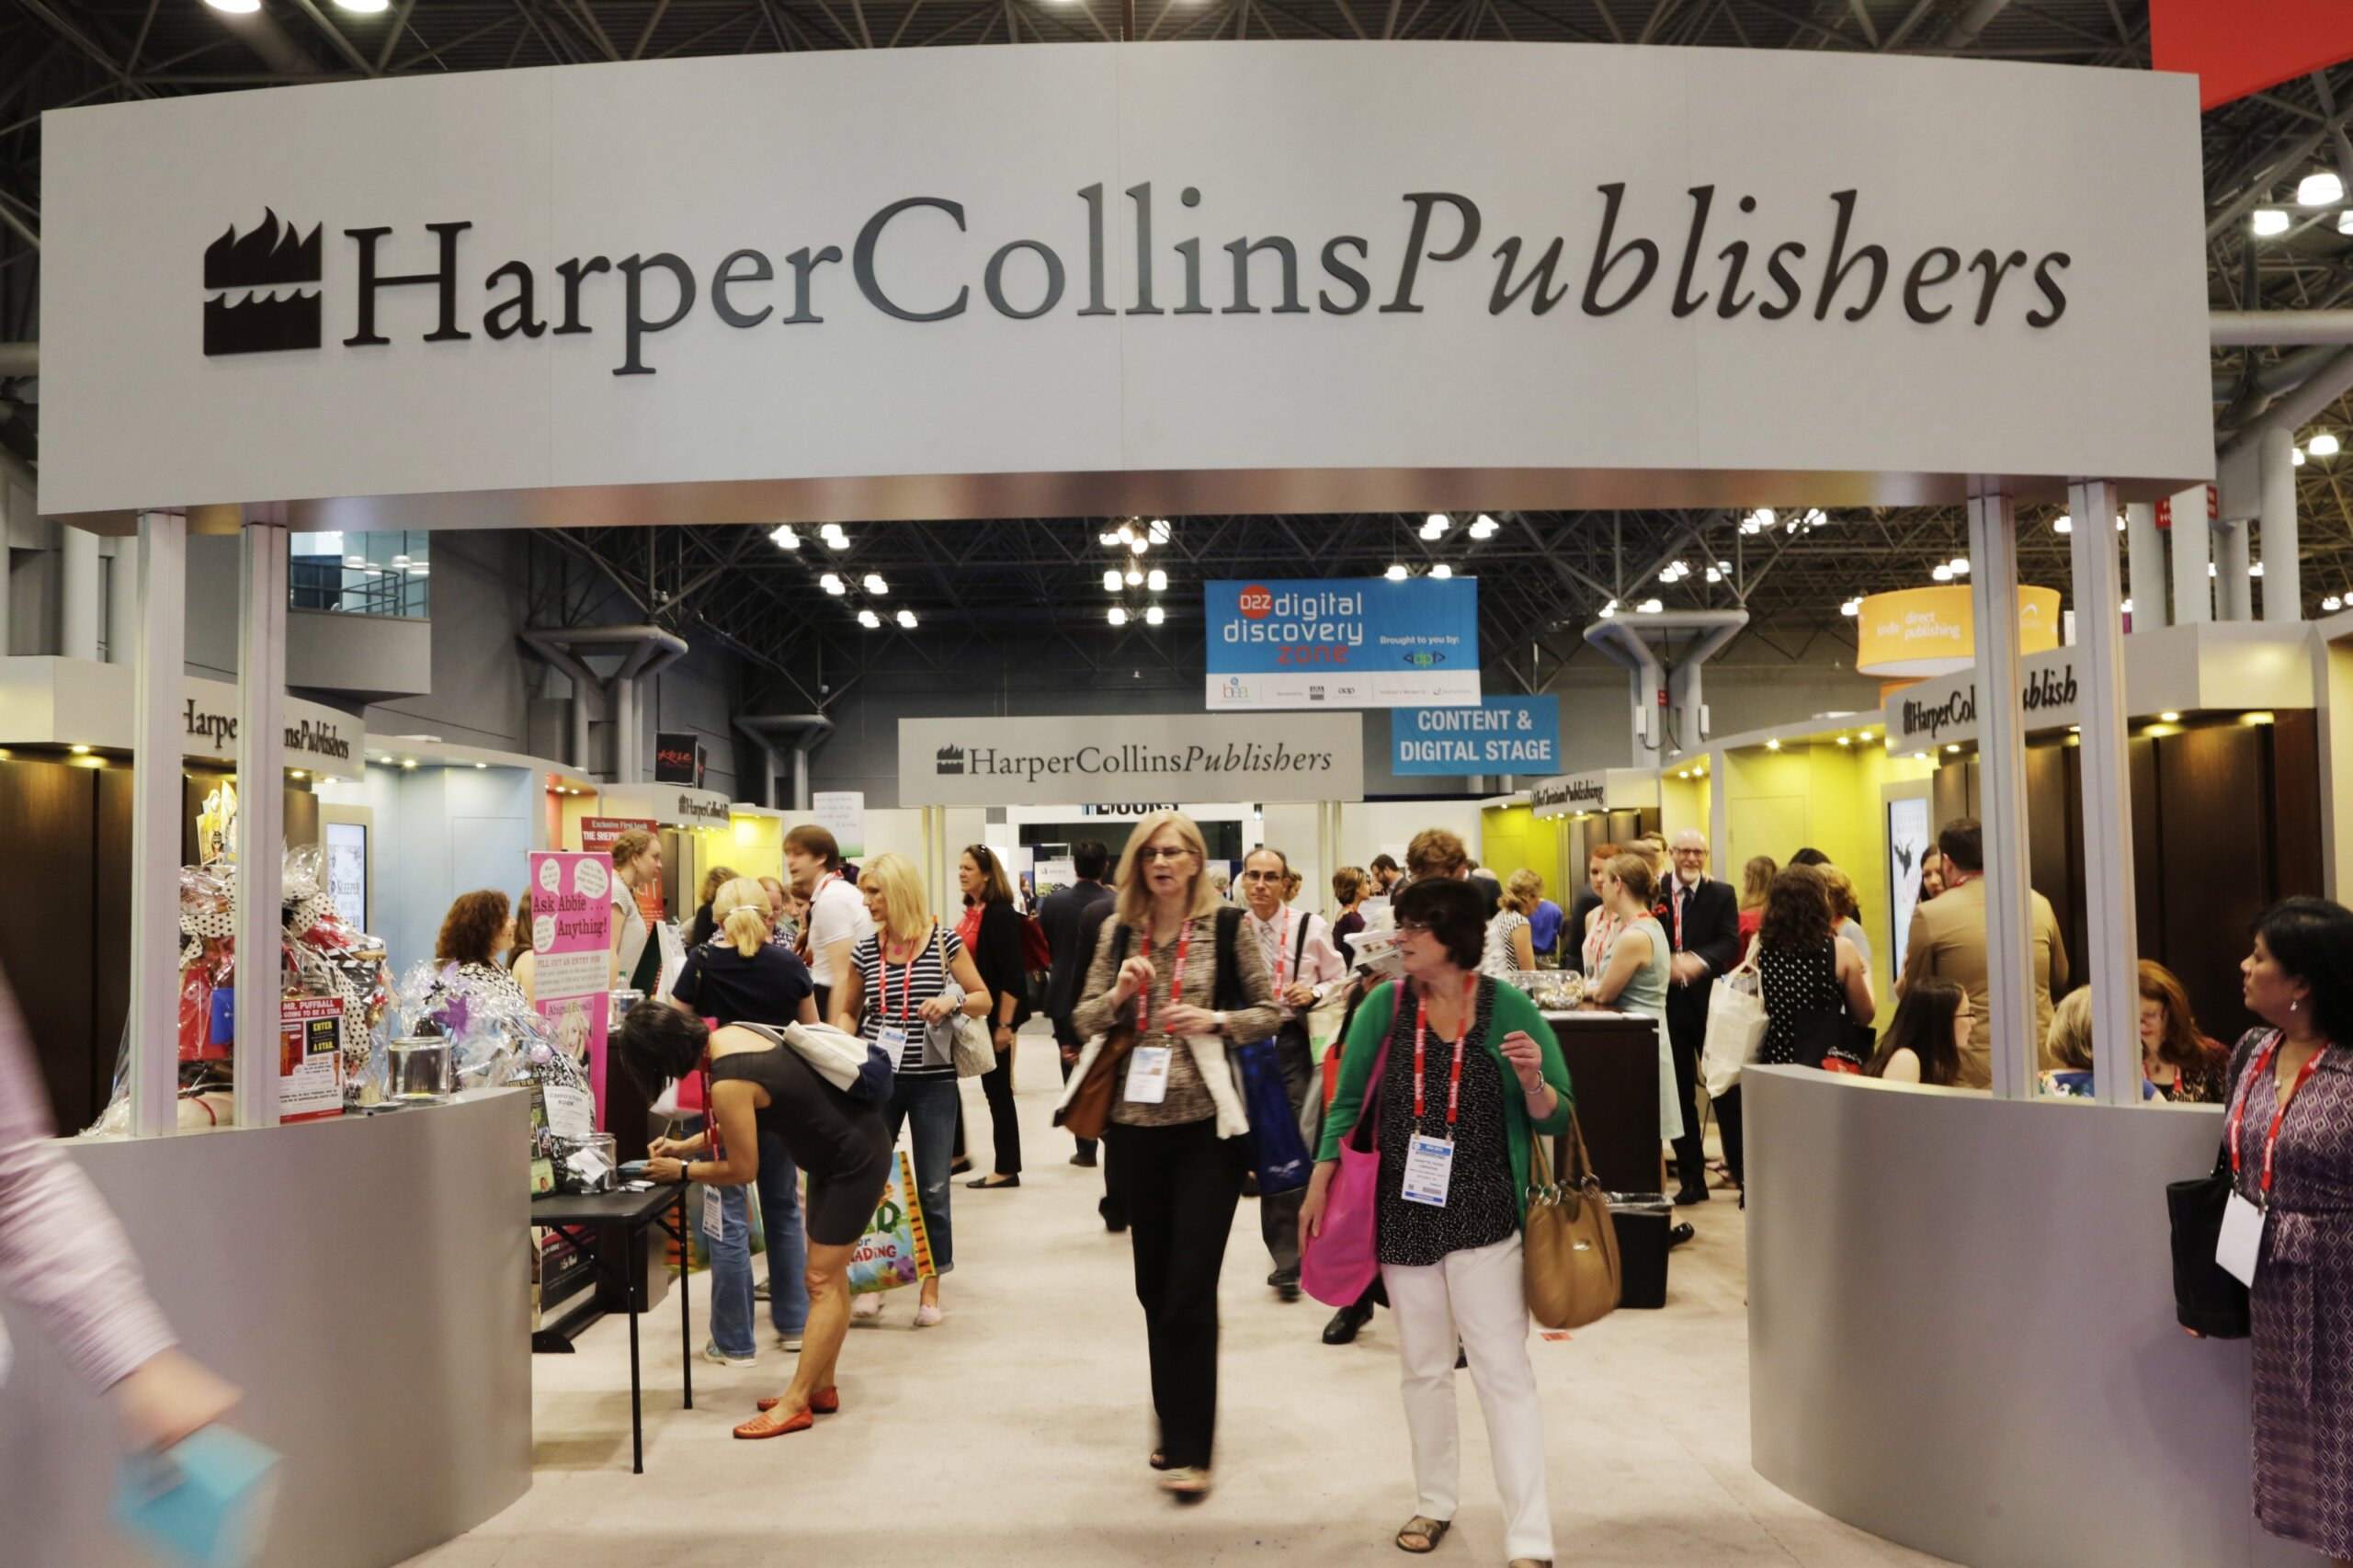 HarperCollins, striking workers agree to federal mediation